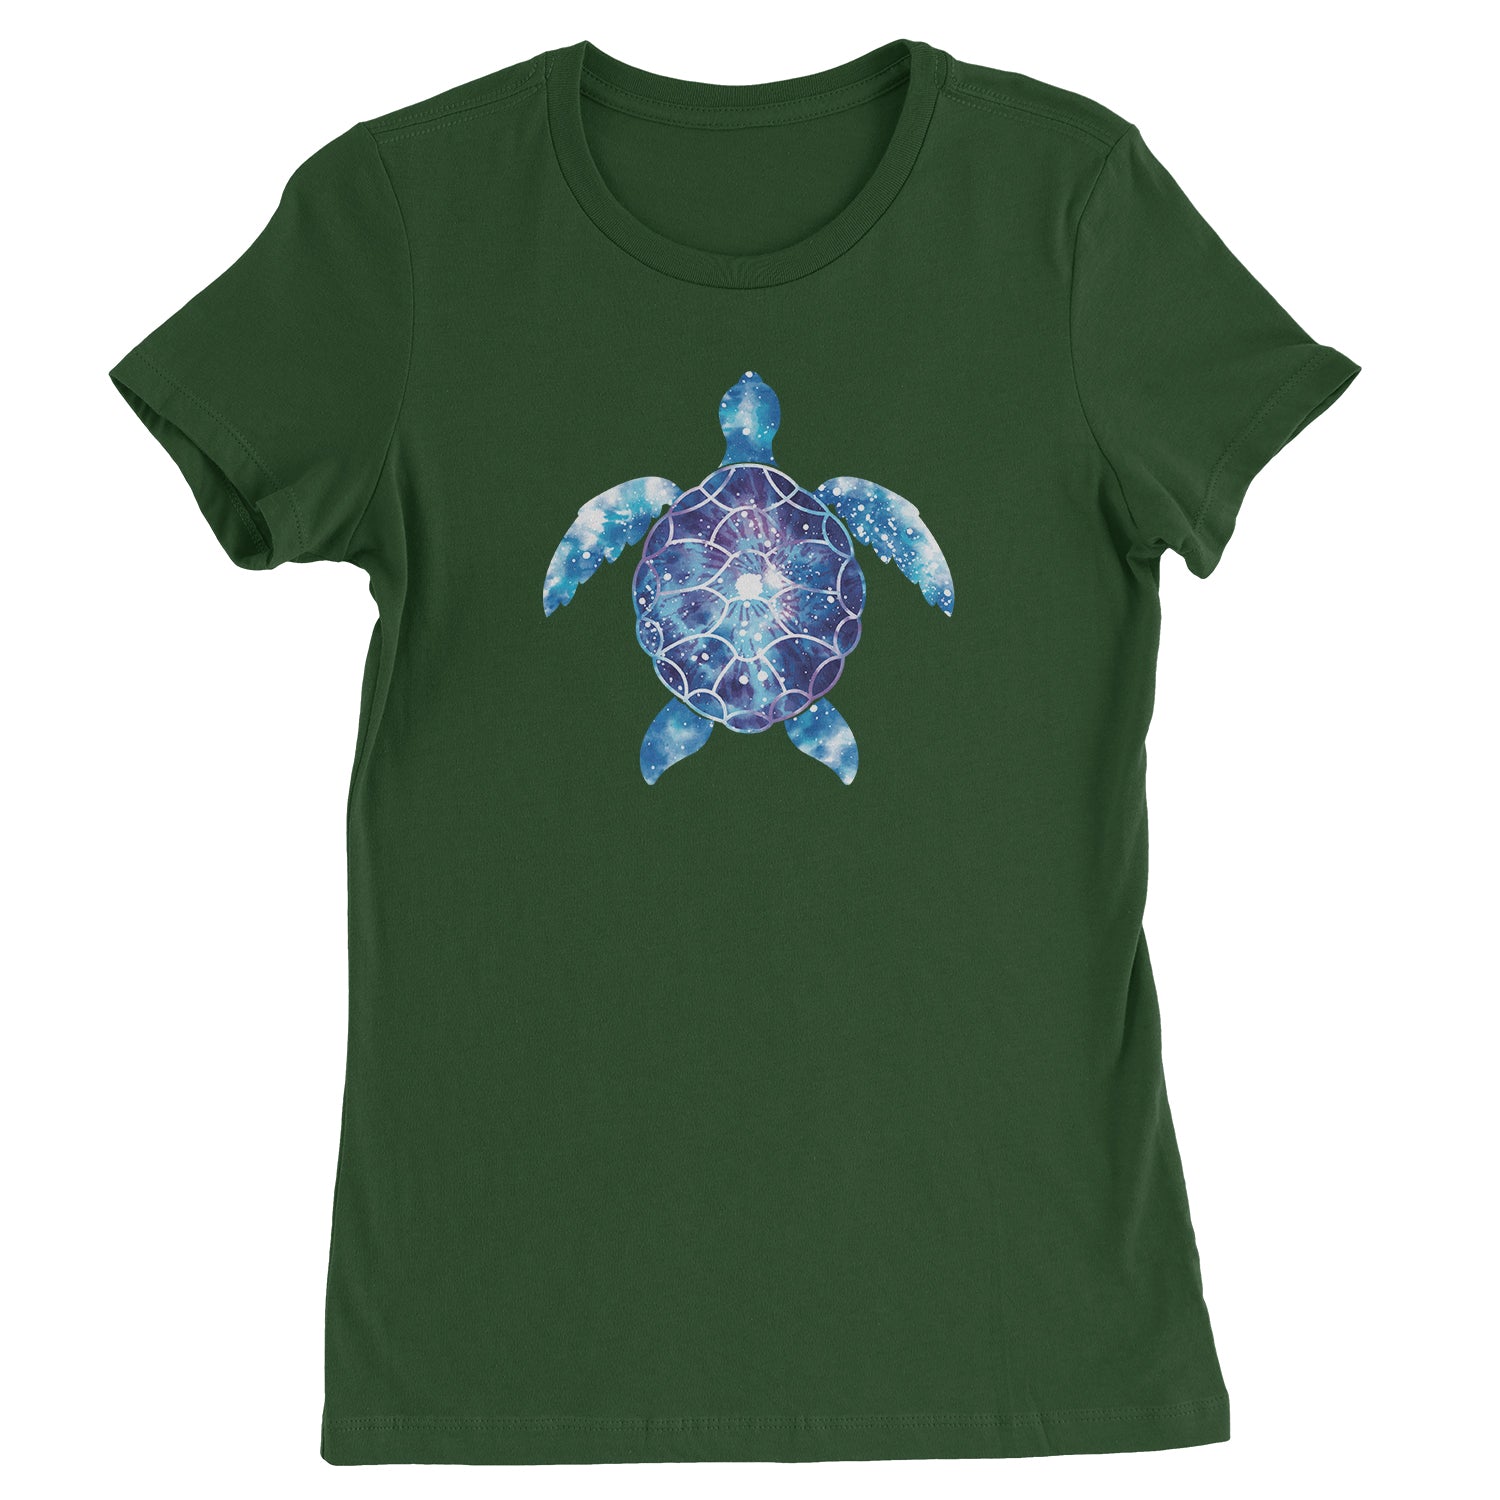 Tie Dye Sea Turtle Womens T-shirt eco, friendly, life, ocean, turtle by Expression Tees